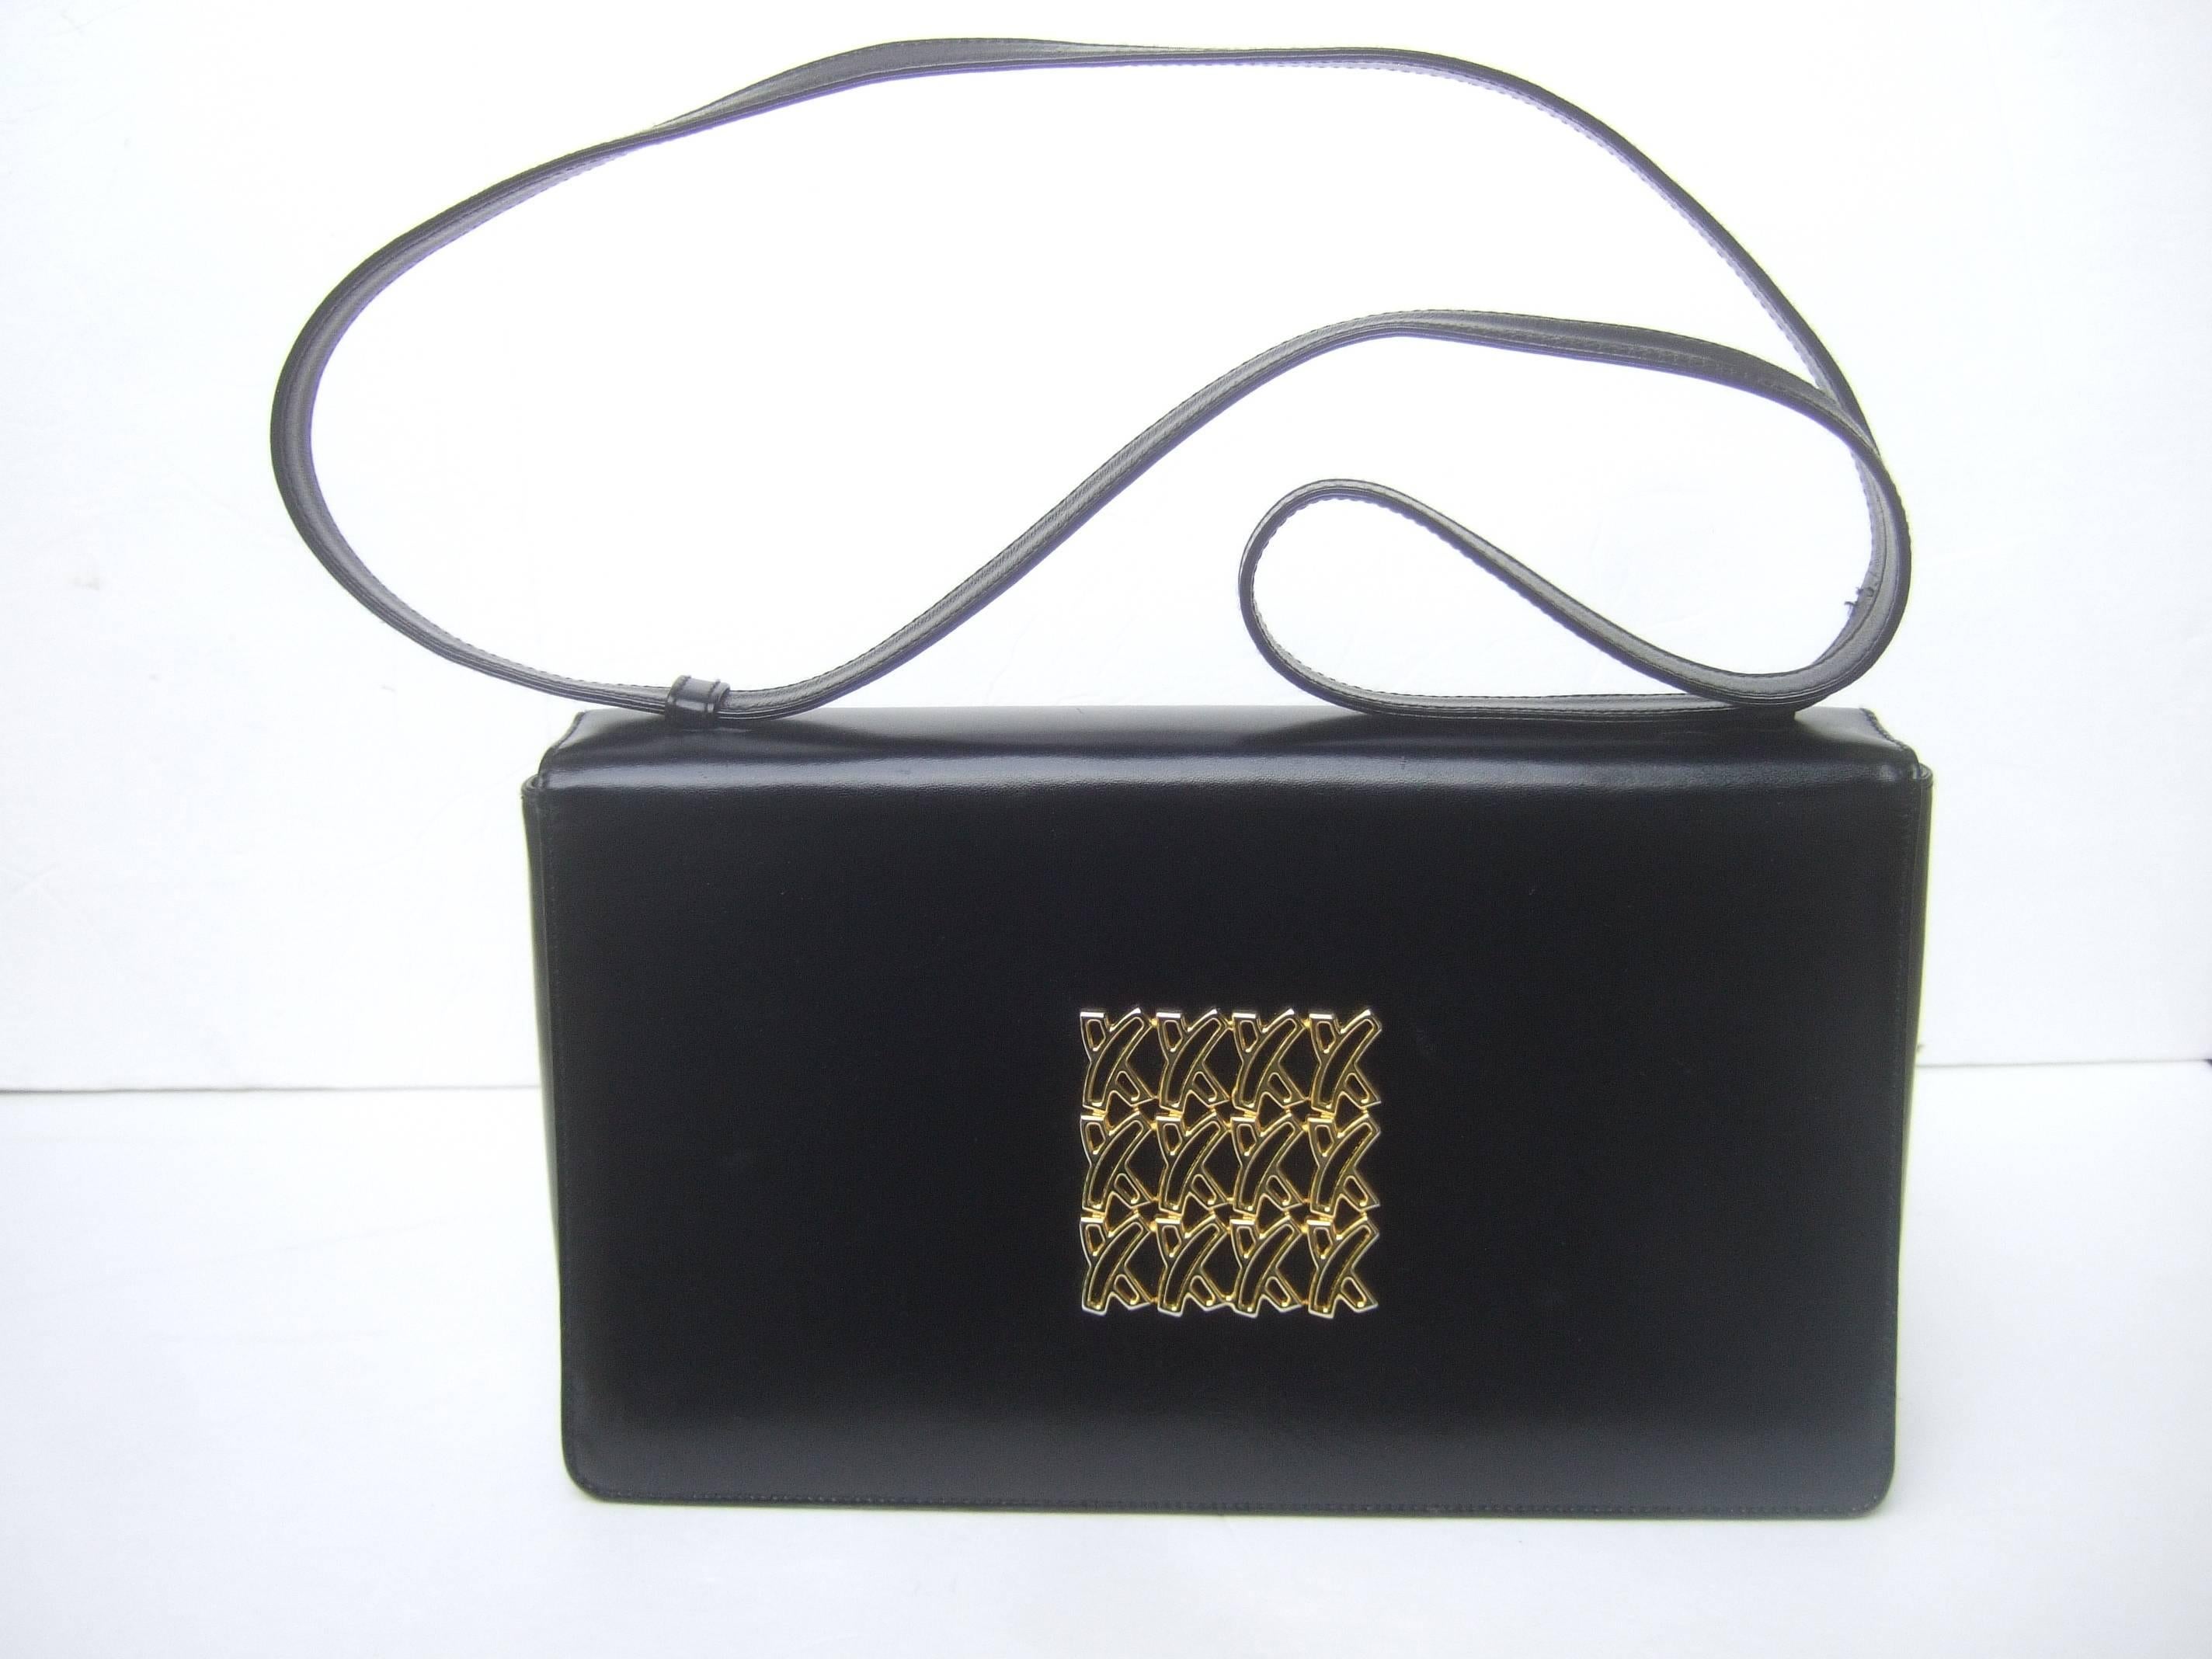 Paloma Picasso Italian black leather shoulder bag 
The stylish black leather handbag is adorned 
with Picasso's signature gilt metal  X symbols

The versatile leather handle strap transitions
from a handbag with double handle